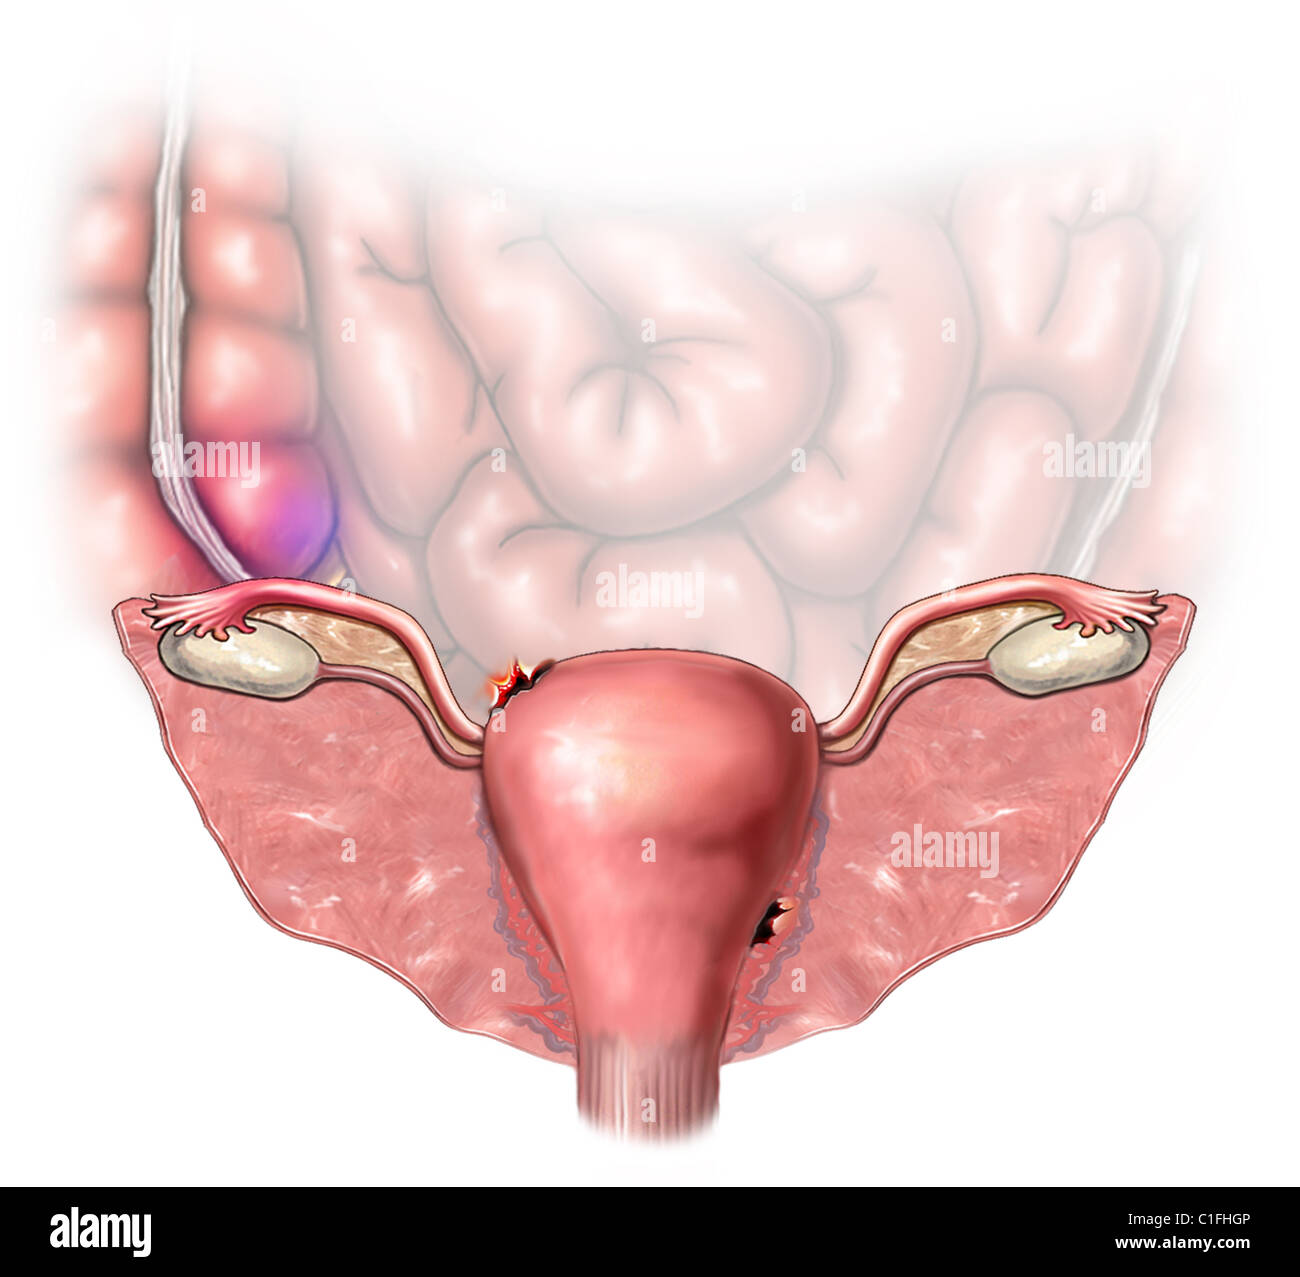 This medical illustration reveals a perforated uterus. Stock Photo